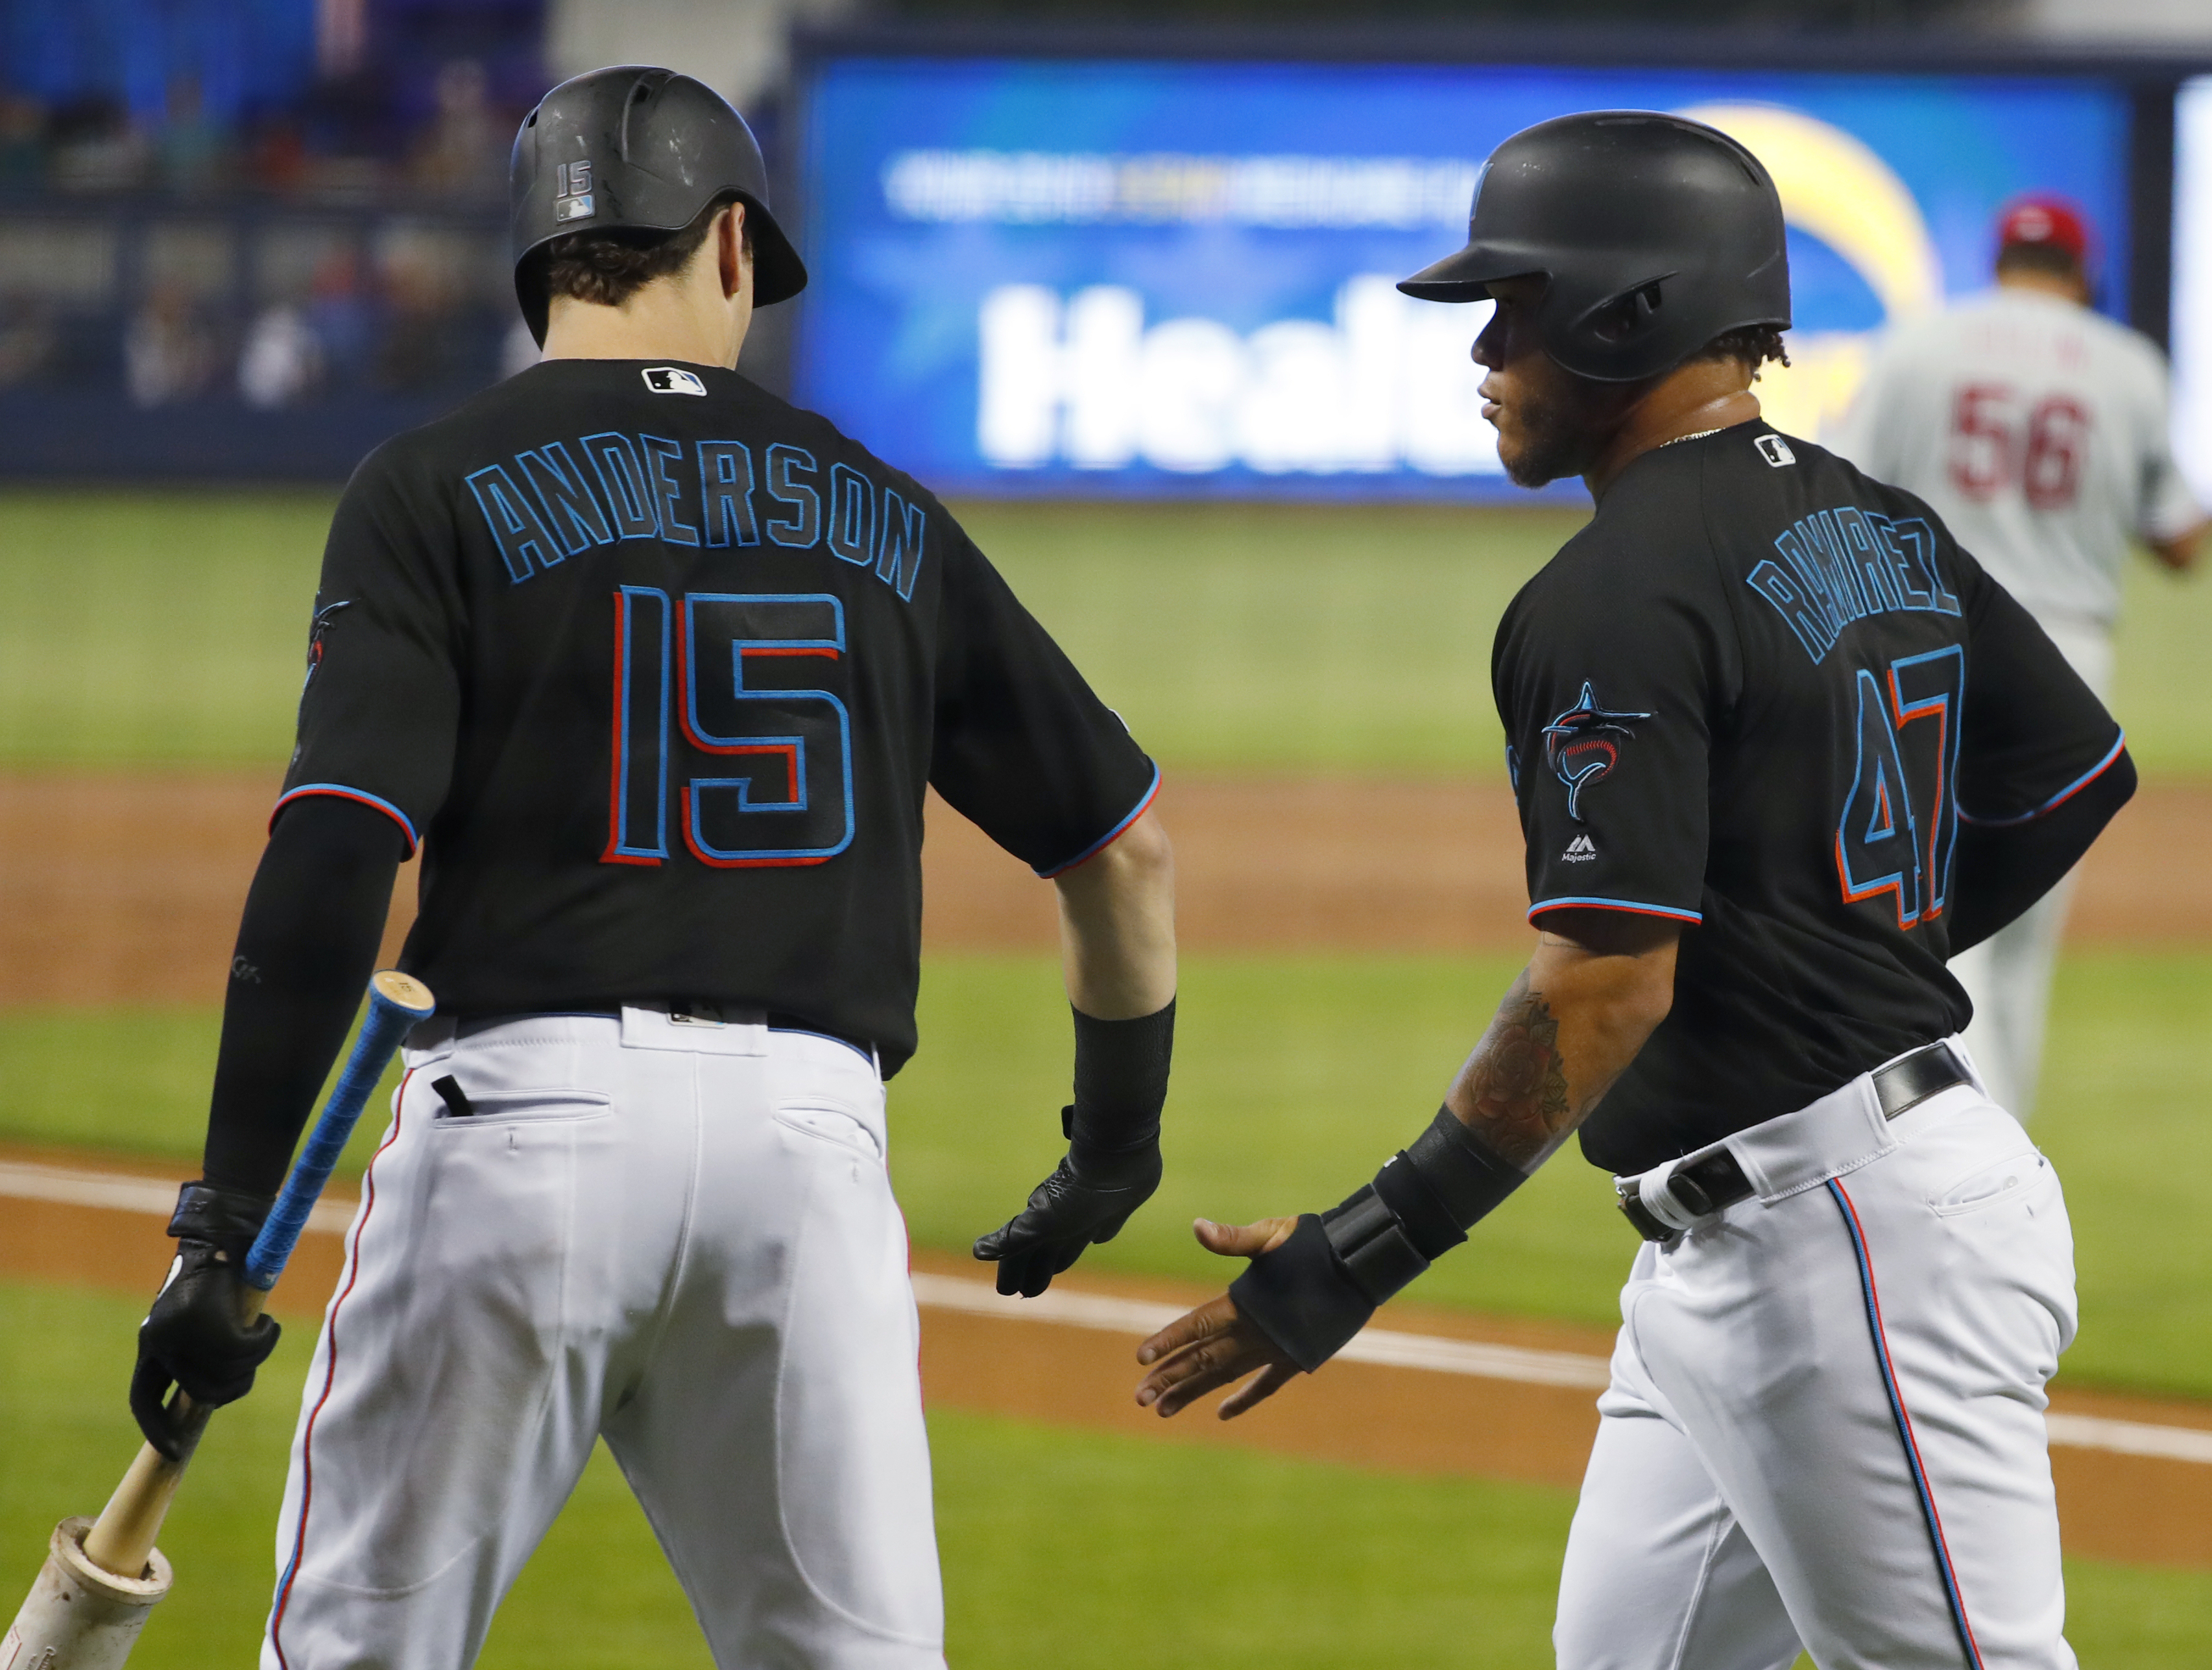 Marlins rally from 5-run deficit to beat Phillies, 9-6